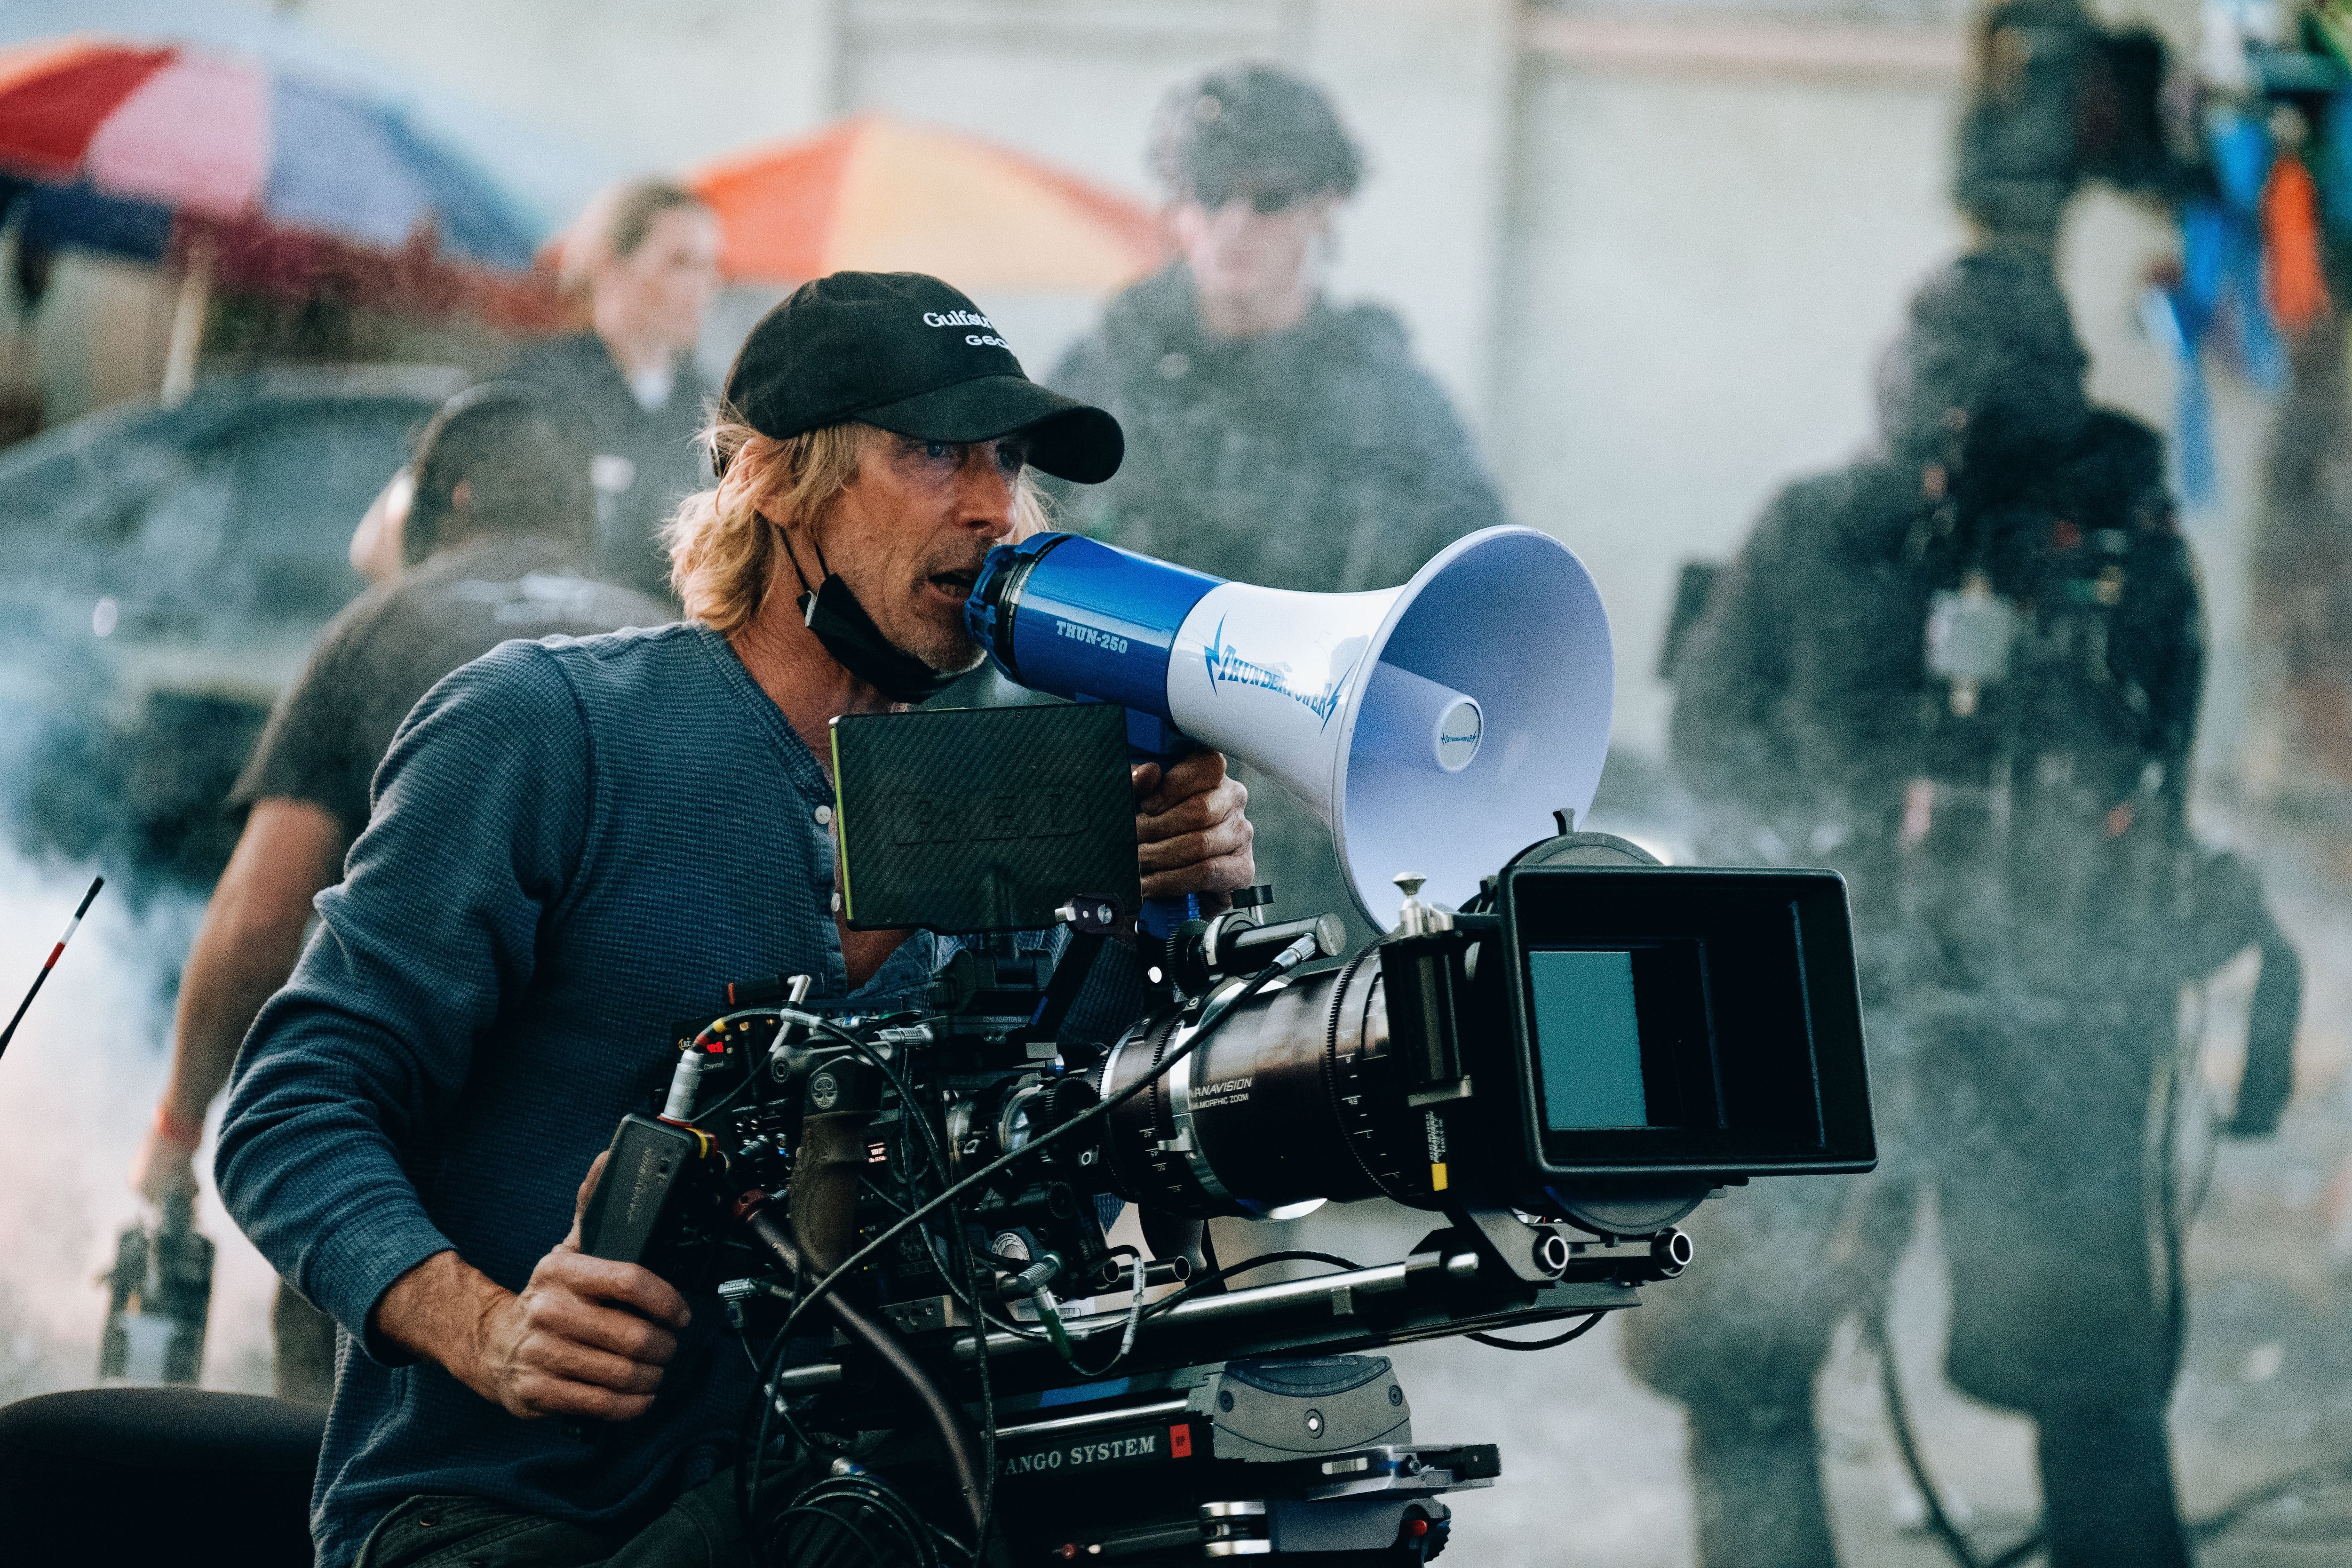 Plantage Implementeren huurling How Michael Bay made heist film 'Ambulance' with Jake Gyllenhaal in record  time